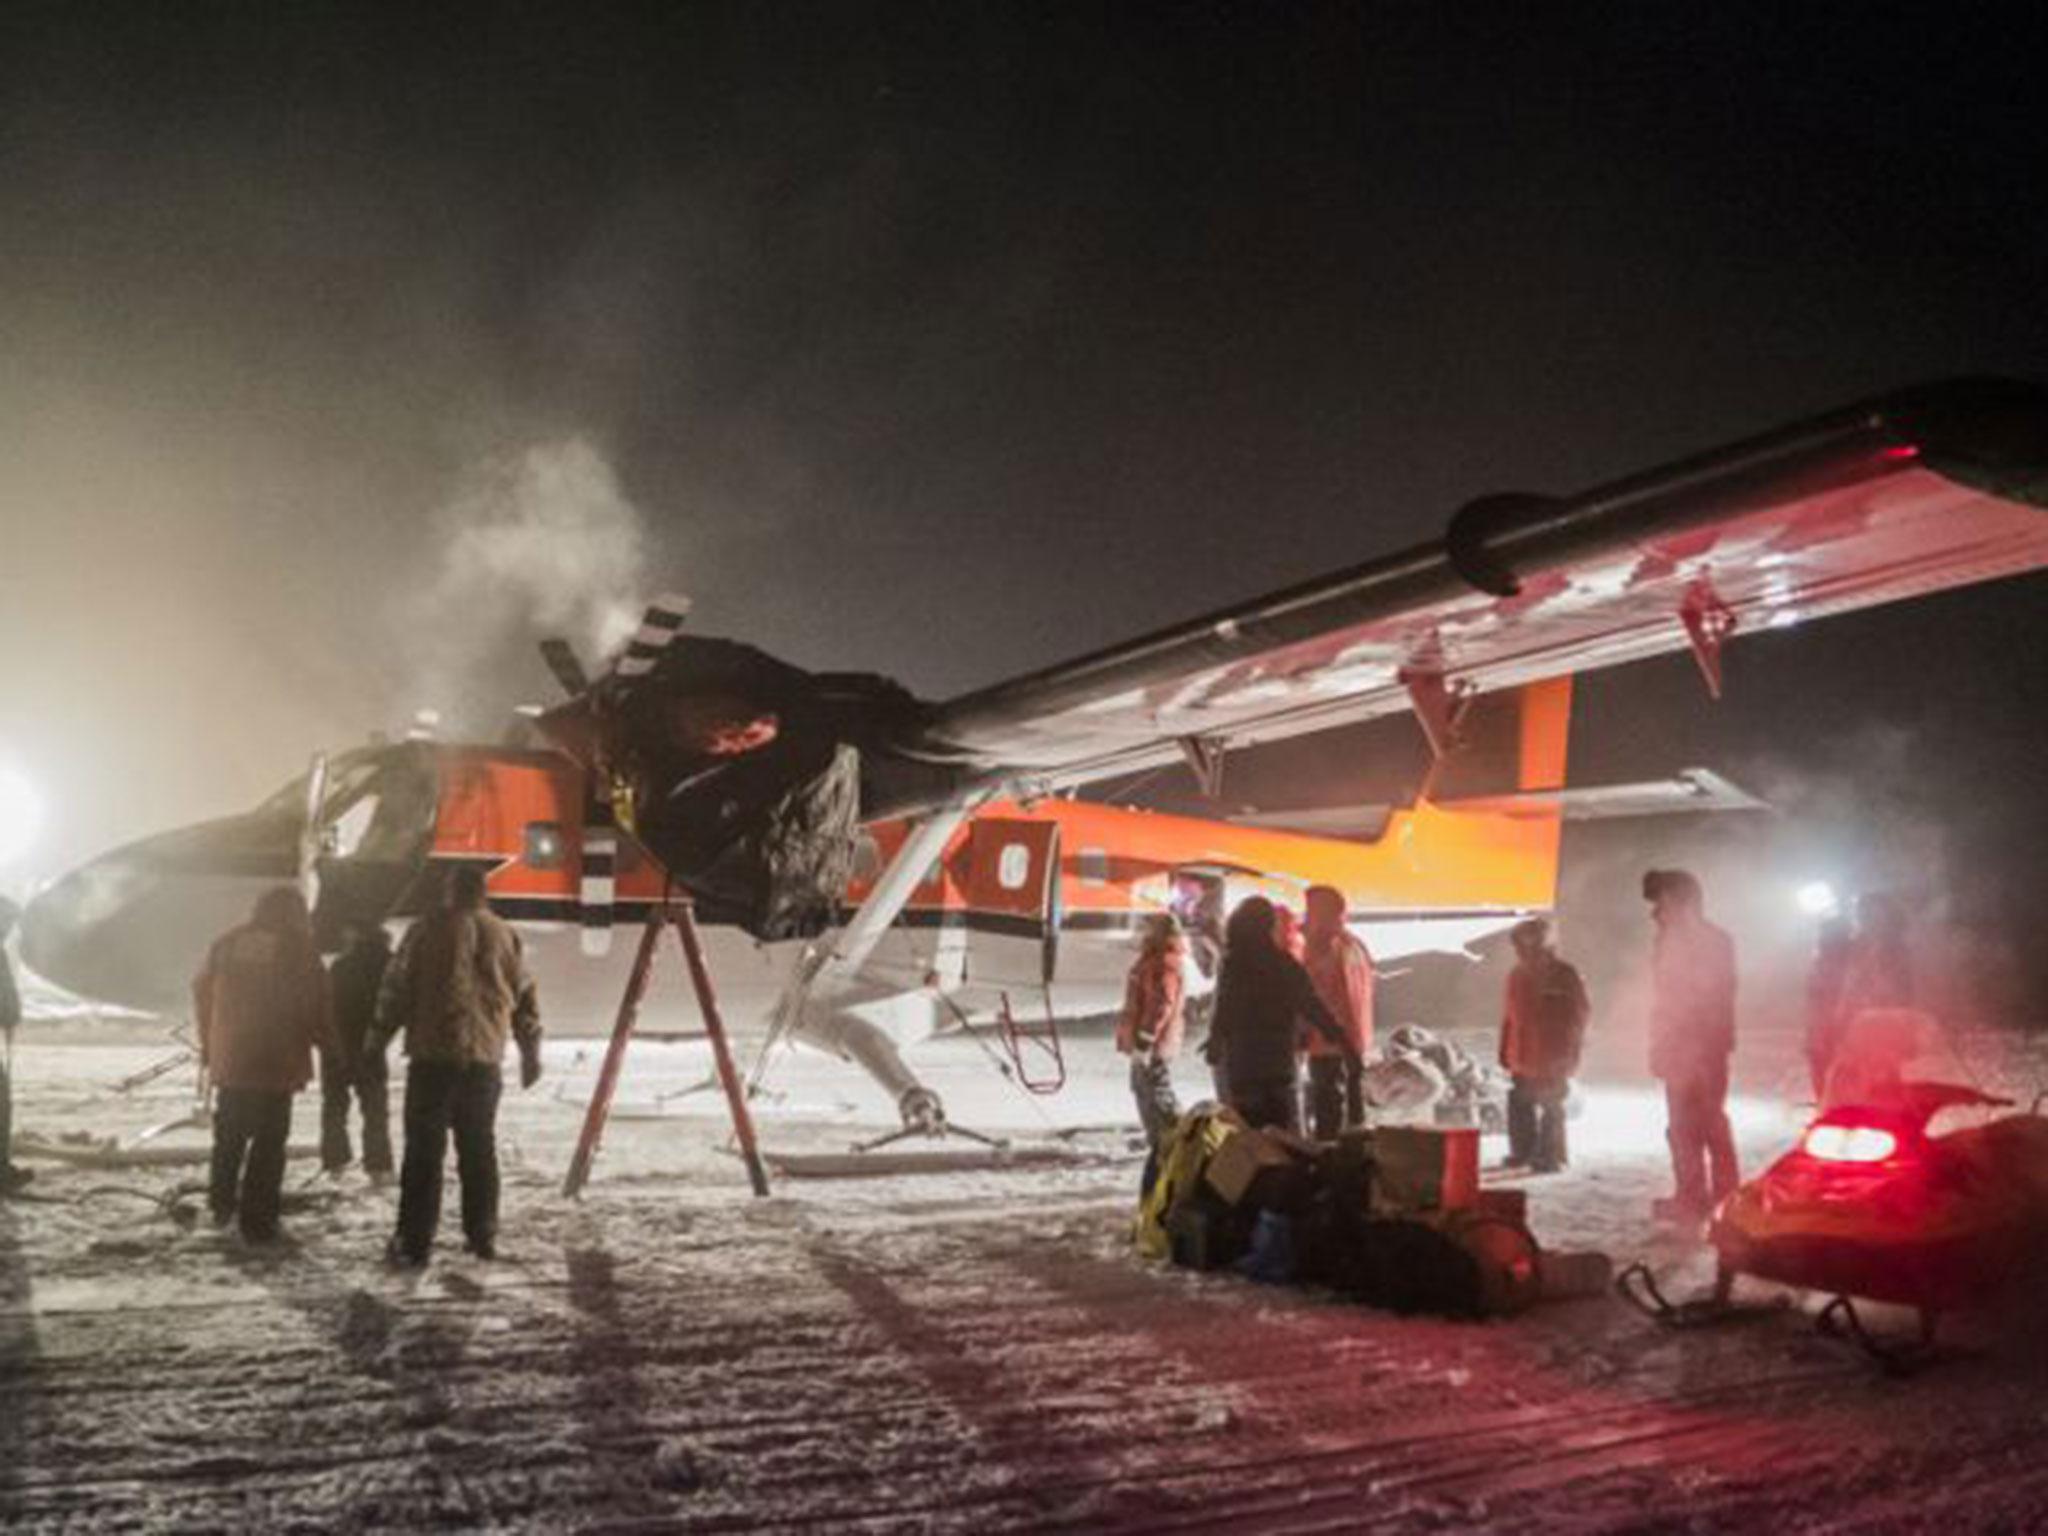 The rescue plane arrives at the south pole